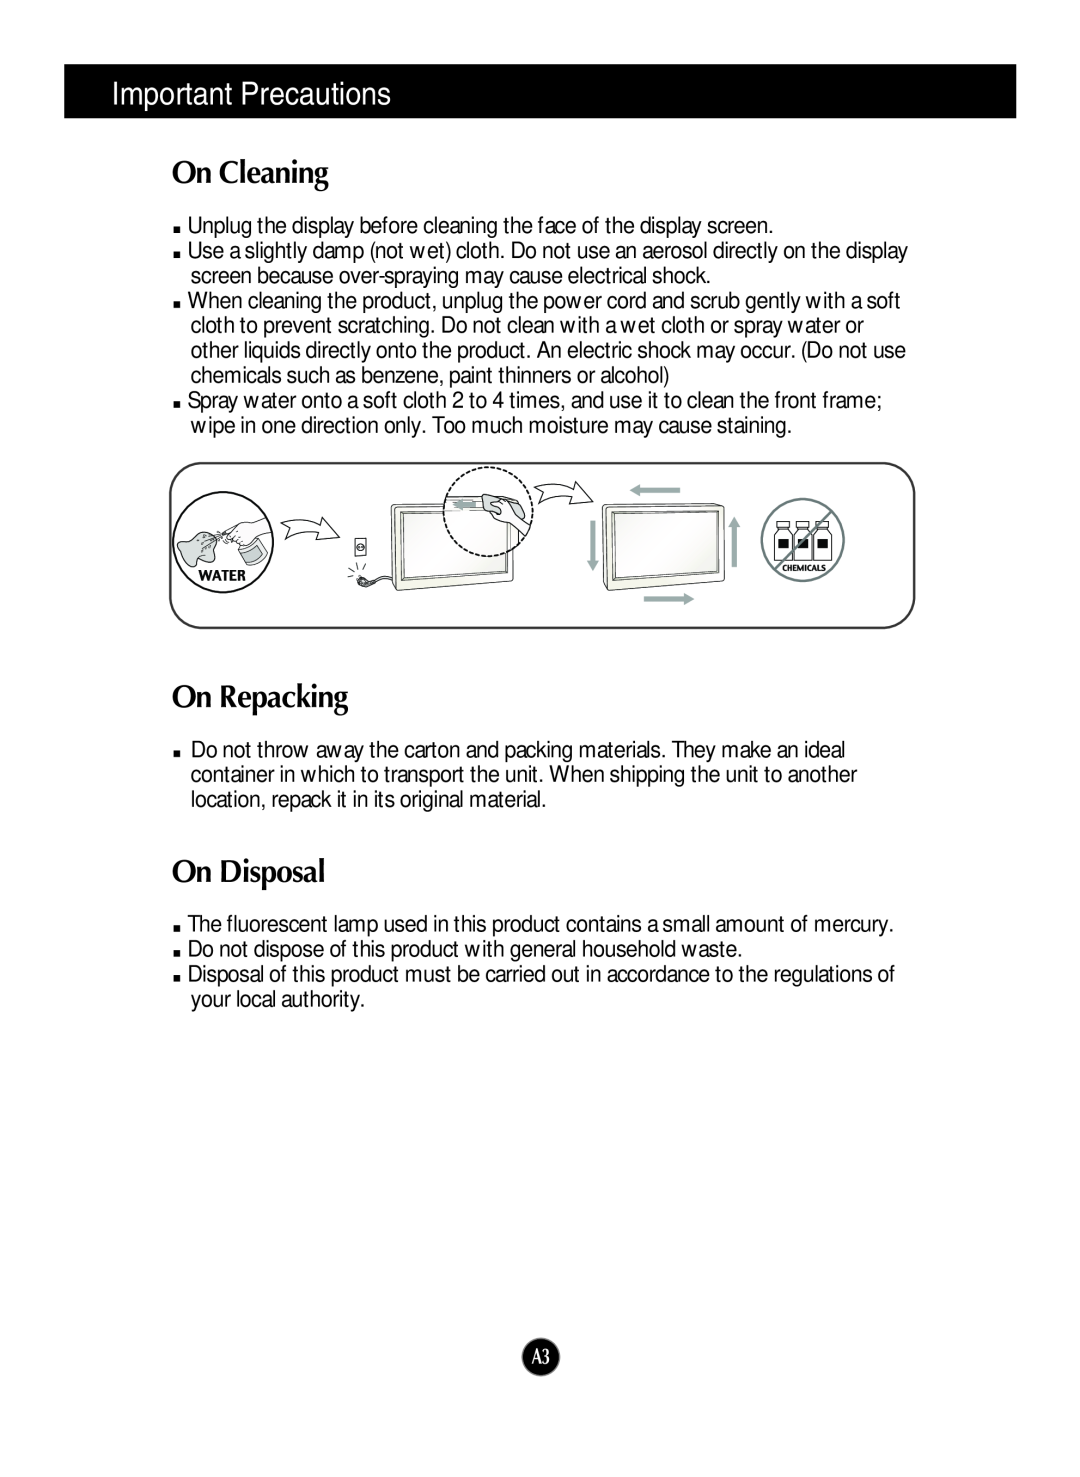 LG Electronics W2253V, W2353V manual On Cleaning, On Repacking, On Disposal, Important Precautions 